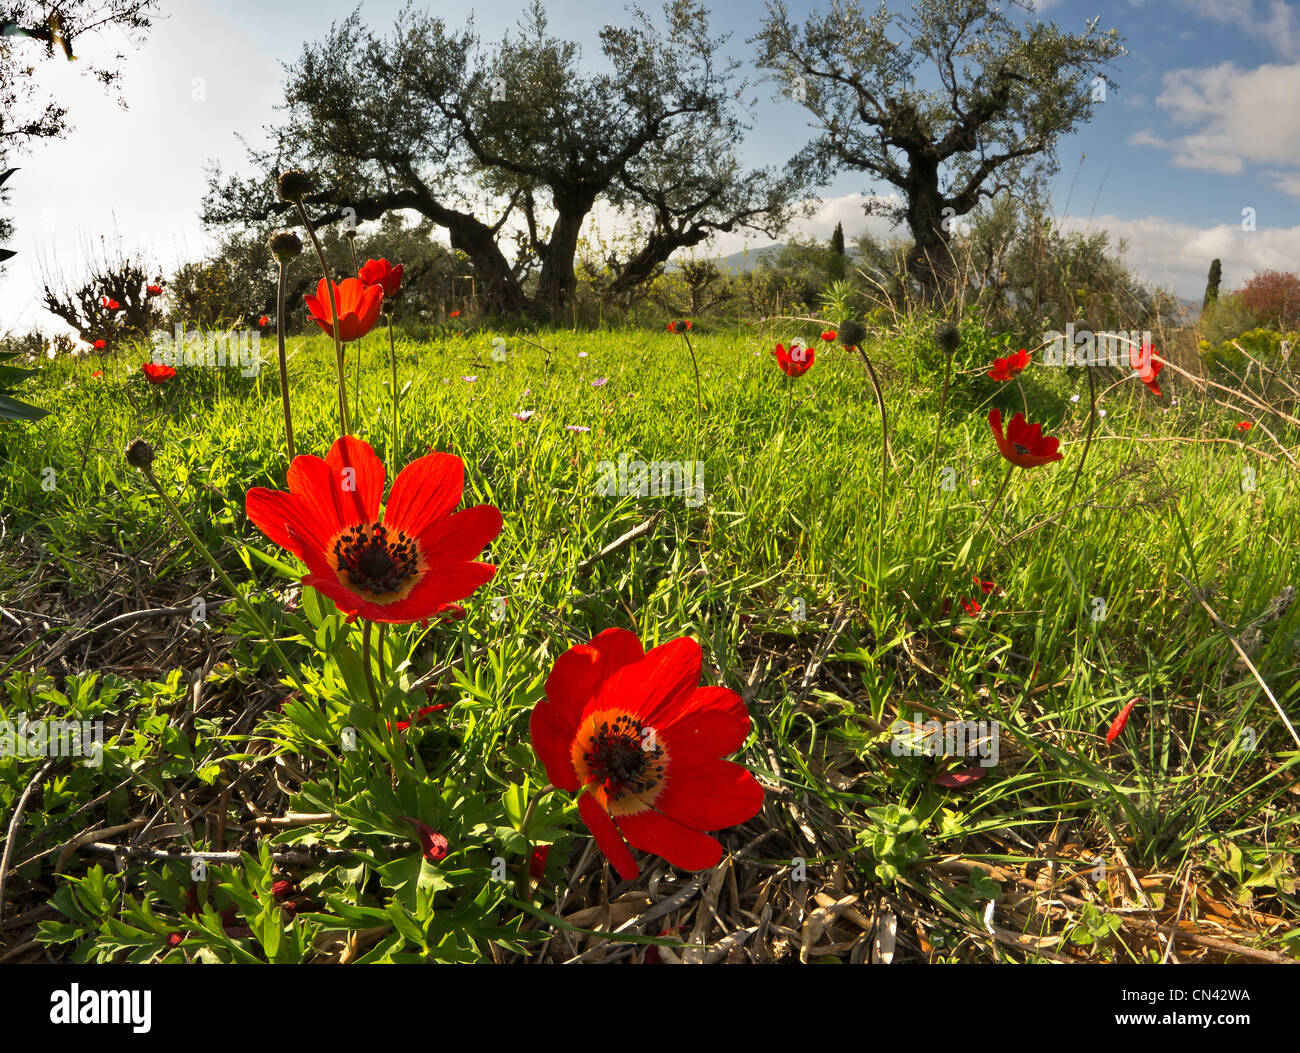 Spring wild flowers, Anemone coronaria, amongst the olive groves in the Outer Mani, Messinia, Southern Greece Stock Photo